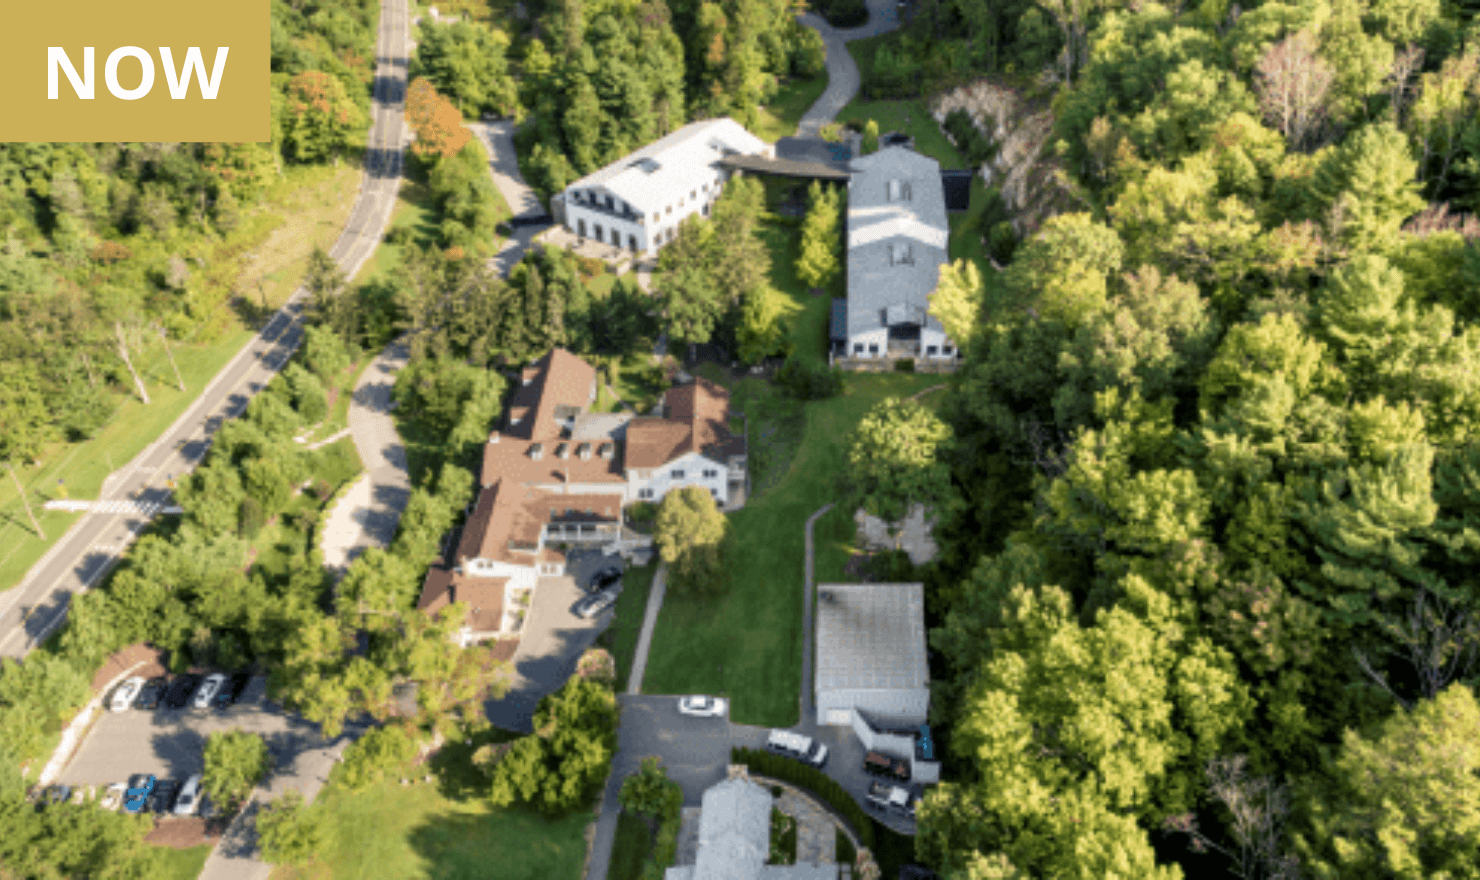 NOW: An aerial view of the Mountainside main campus in Canaan, CT